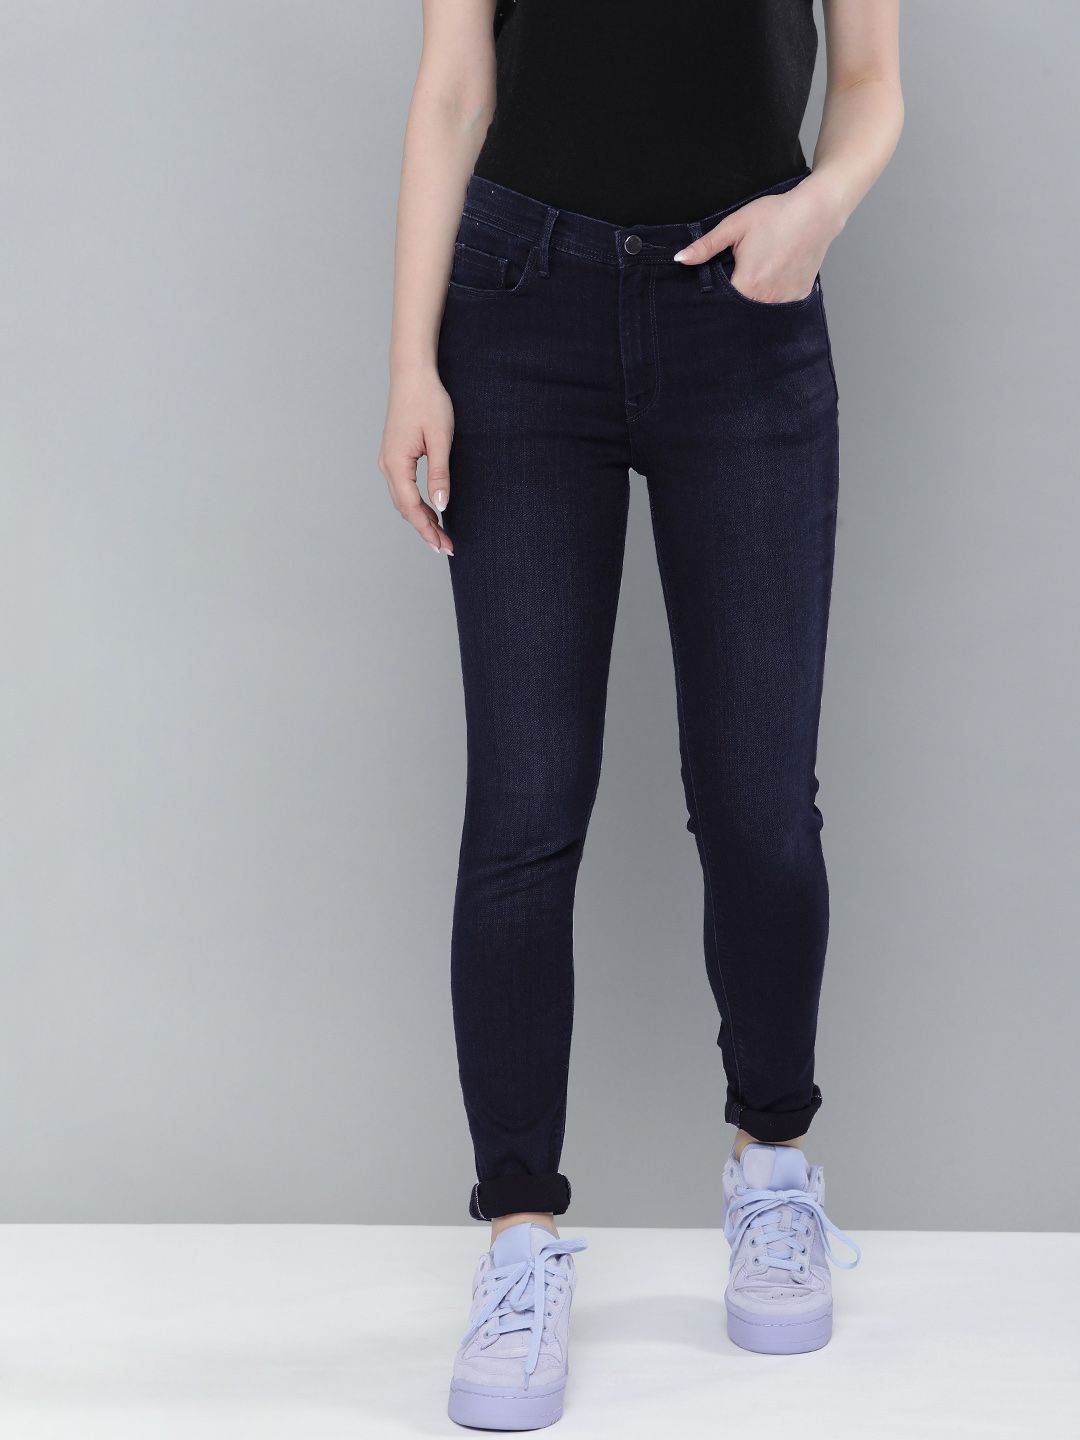 Levis Women Navy Blue 711 Skinny Fit MId Rise Jeans Price in India